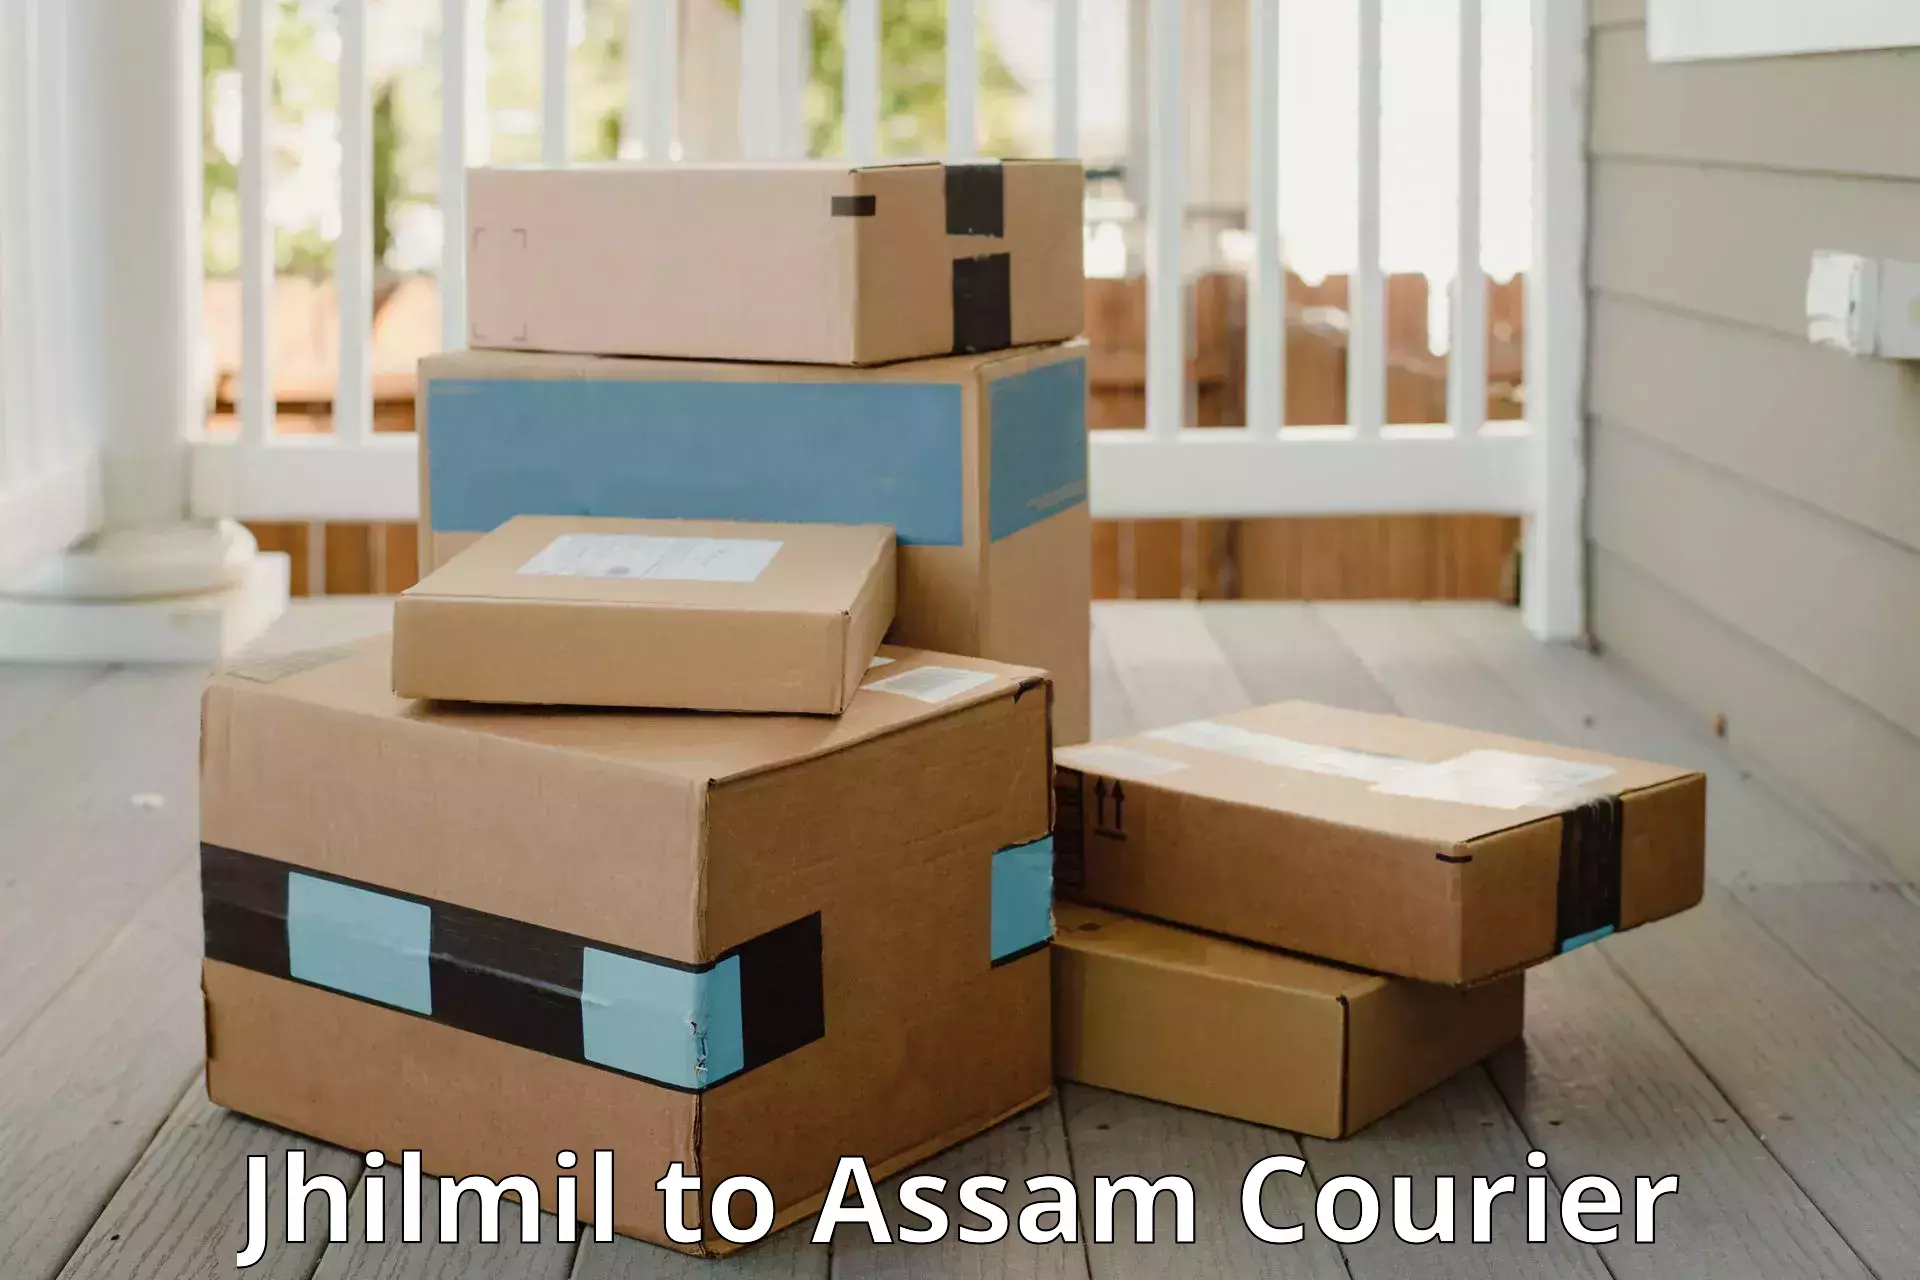 Baggage transport coordination Jhilmil to Lala Assam